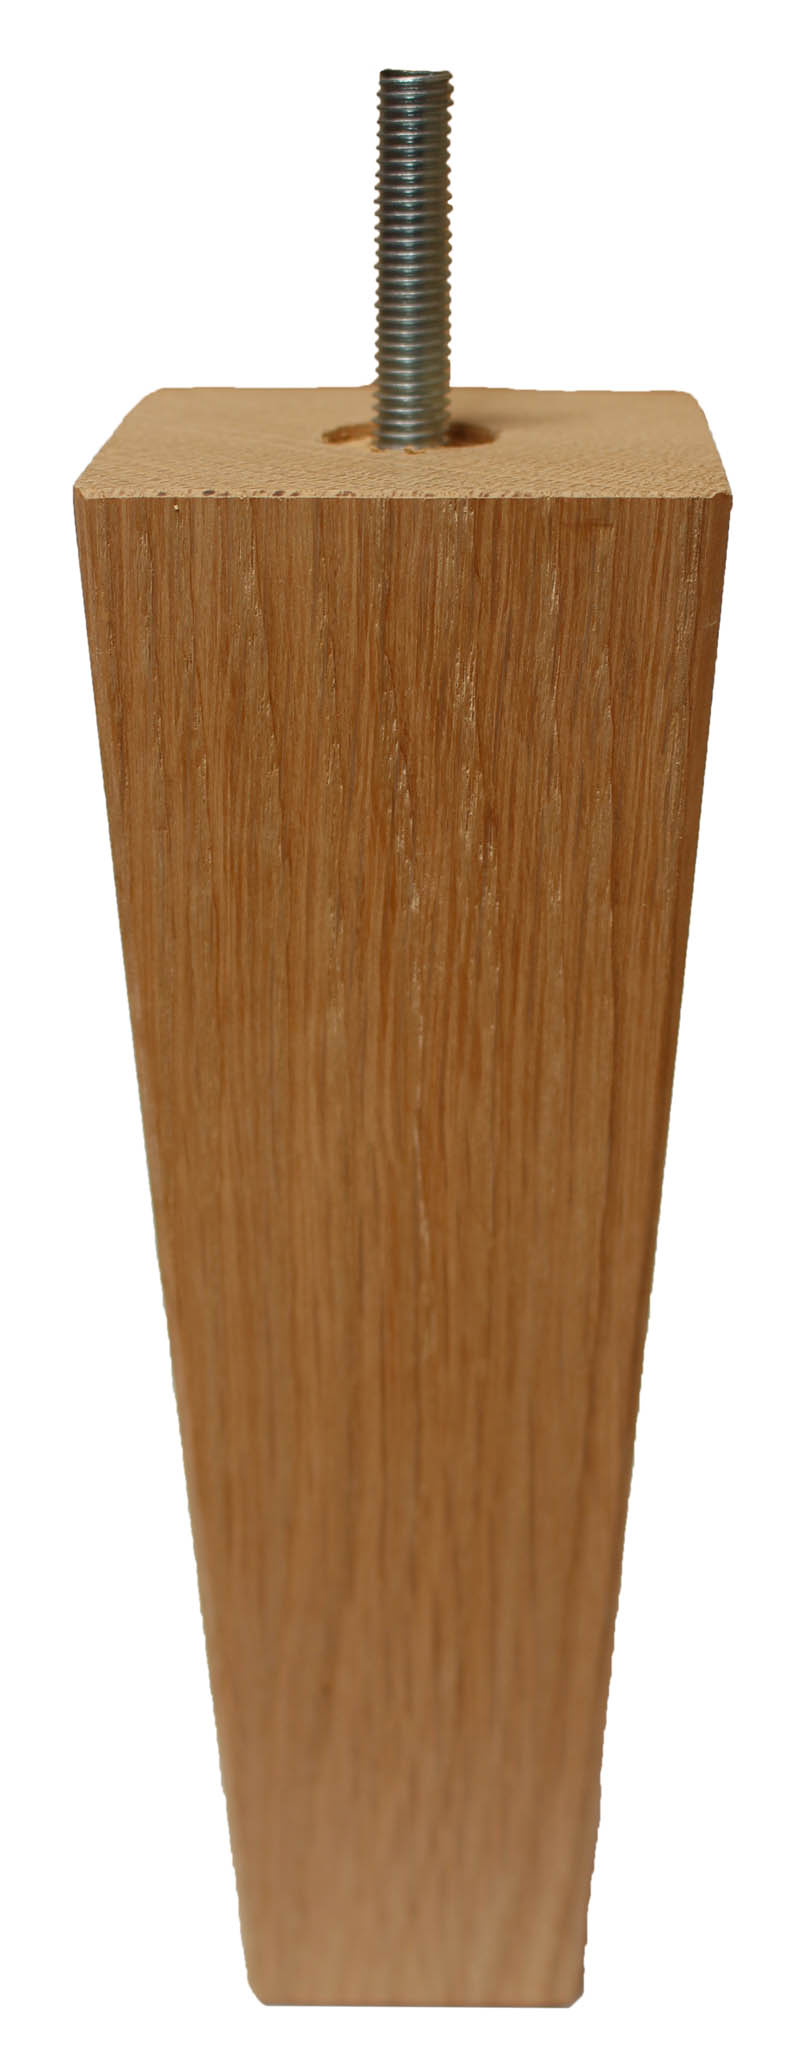 Millie Solid Oak Square Tapered Wooden Furniture Legs